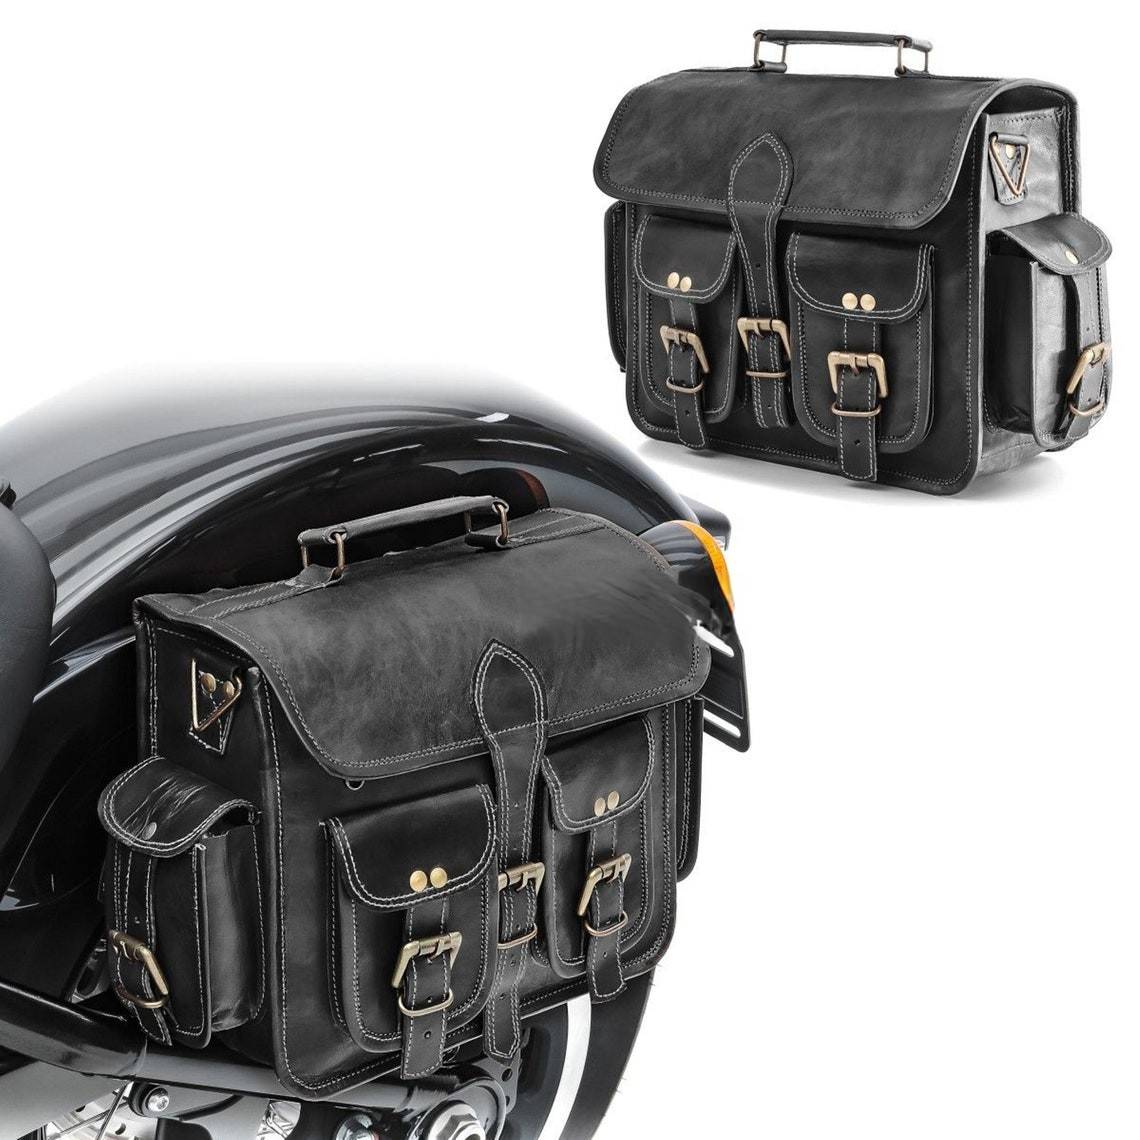 PARRYS LEATHER WORLD  Panniers Bags Postman Bag Set Of Two Leather Bike  Bag Side Bag For 2 Wheeler  One Side Leather Bag  Side Bag For Bike   Black Leather